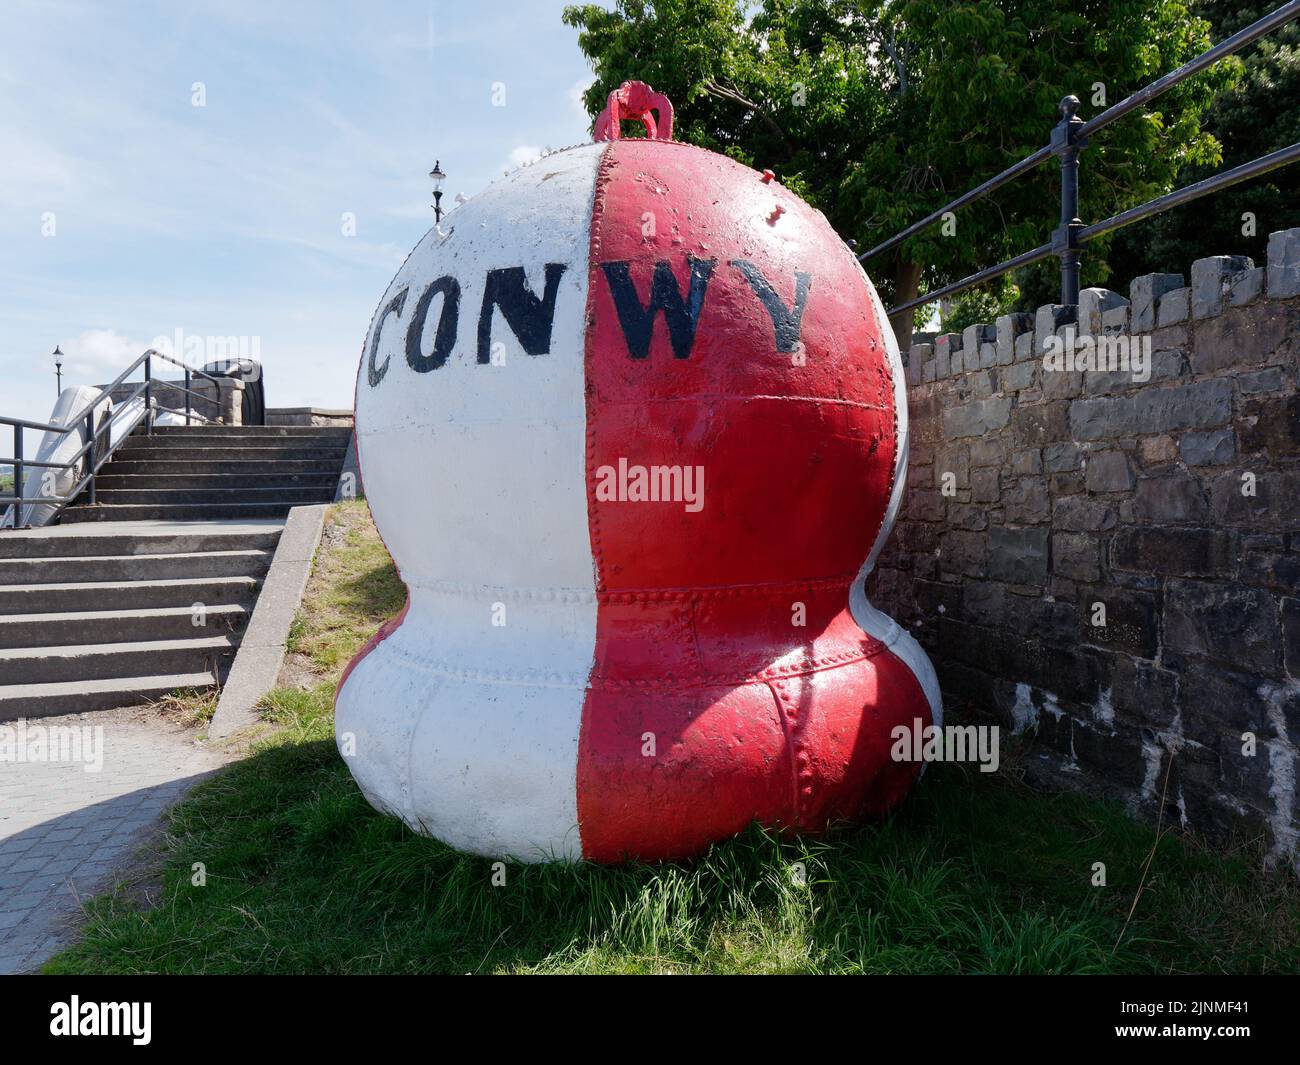 Conwy, Clwyd, Wales, August 07 2022: Red and White buoy with the name Conwy on it. Stock Photo